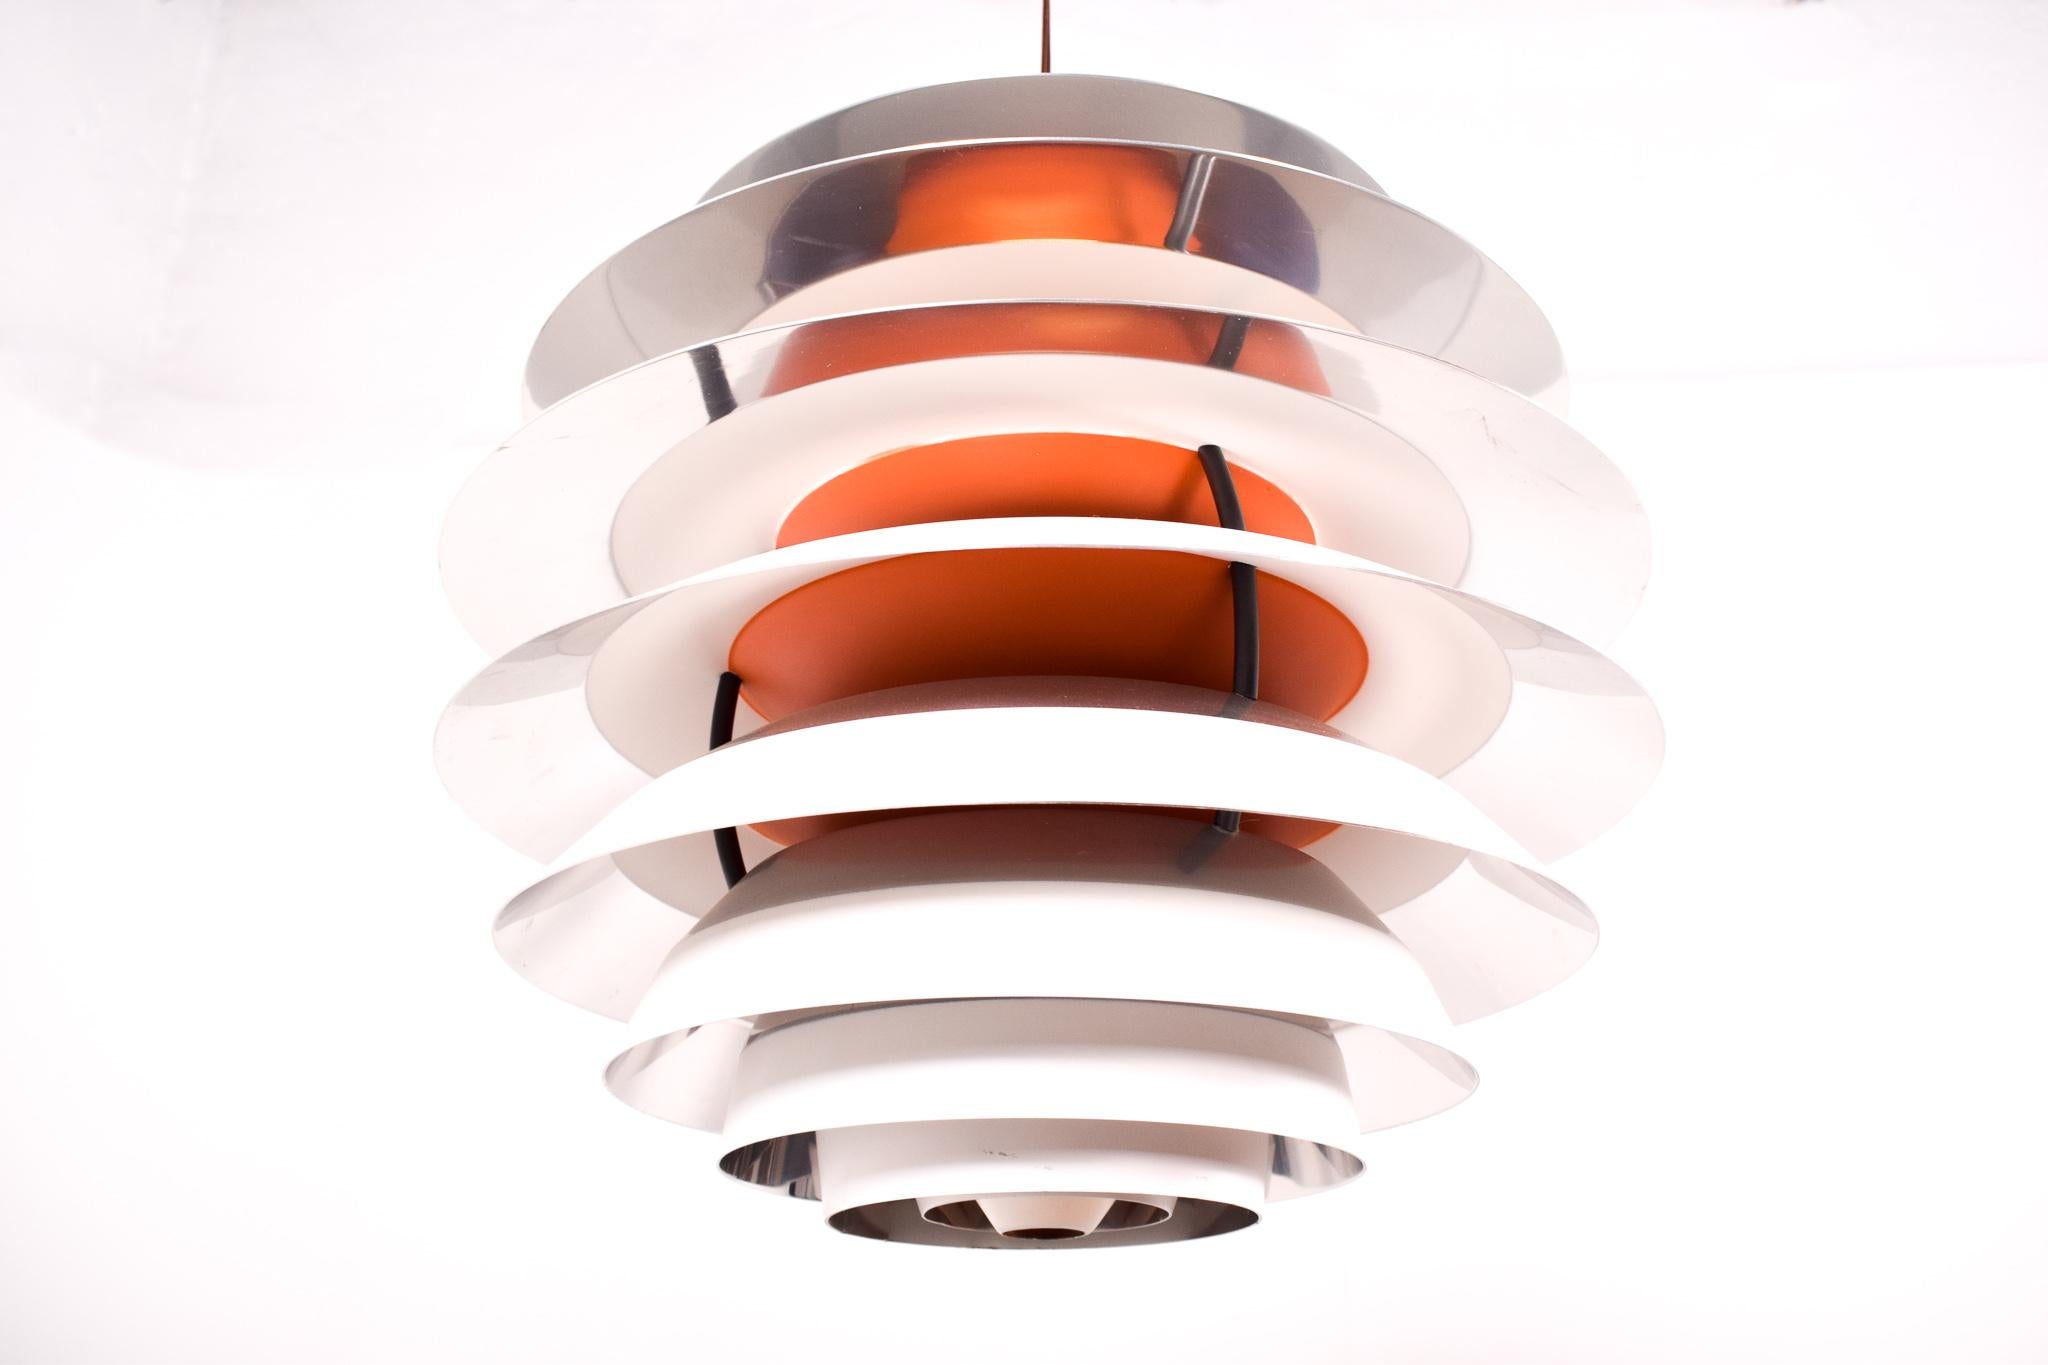 Pendant light, model Kontrast, designed in 1960 by Poul Henningsen for Louis Poulsen. Made of aluminium ten aluminium shades held together with three steel supports. The lightbulb inside the lamp can be moved up and down. This ability to adjust the